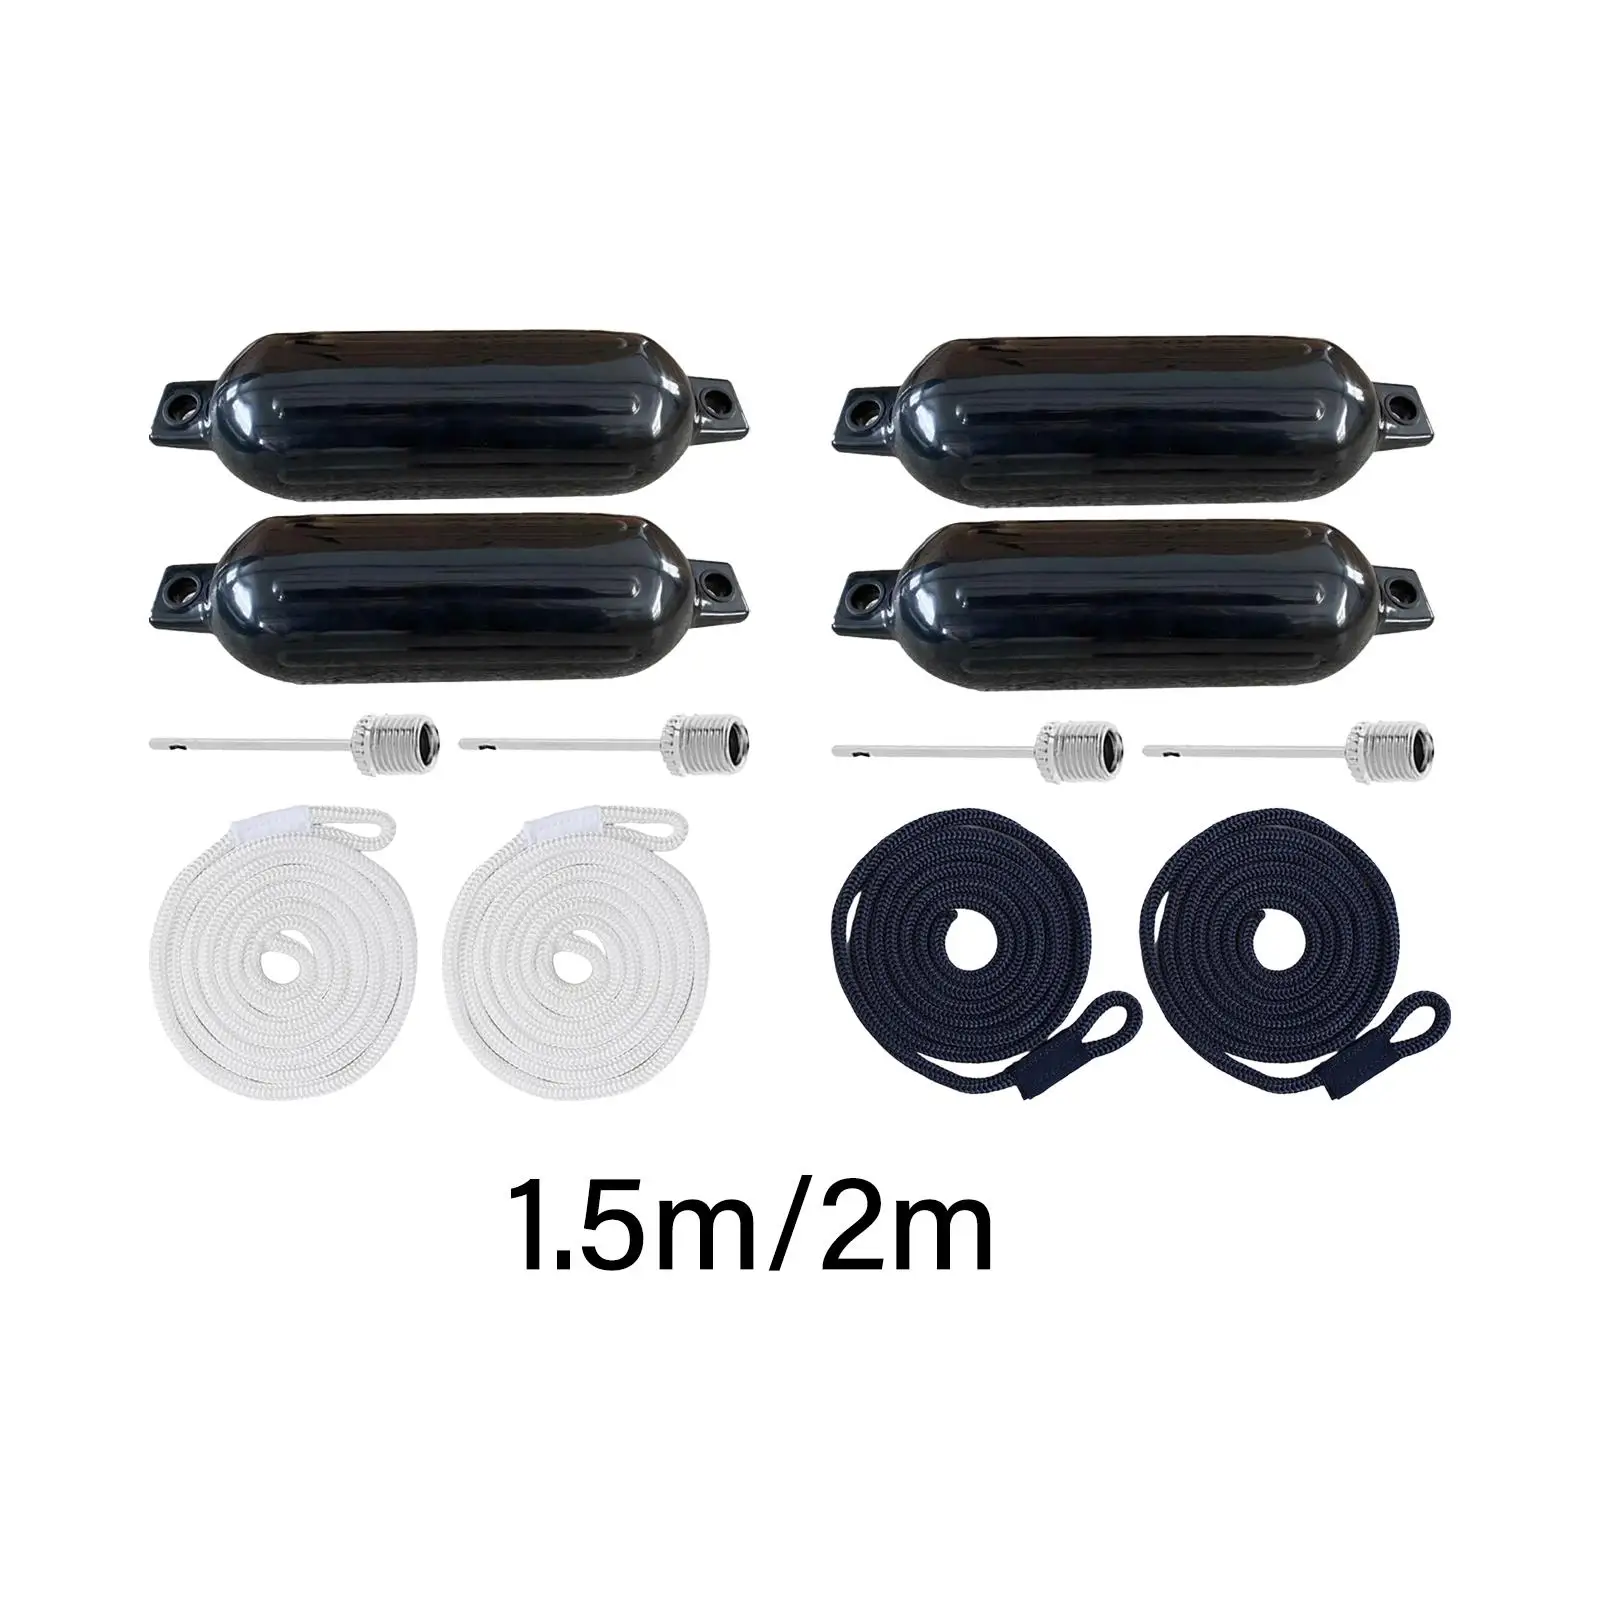 Marine Boat Fenders Boat Accessories 4x16inch Inflatable Marine Boat Bumper for Sailboats Speedboat Docking Pontoon Yacht